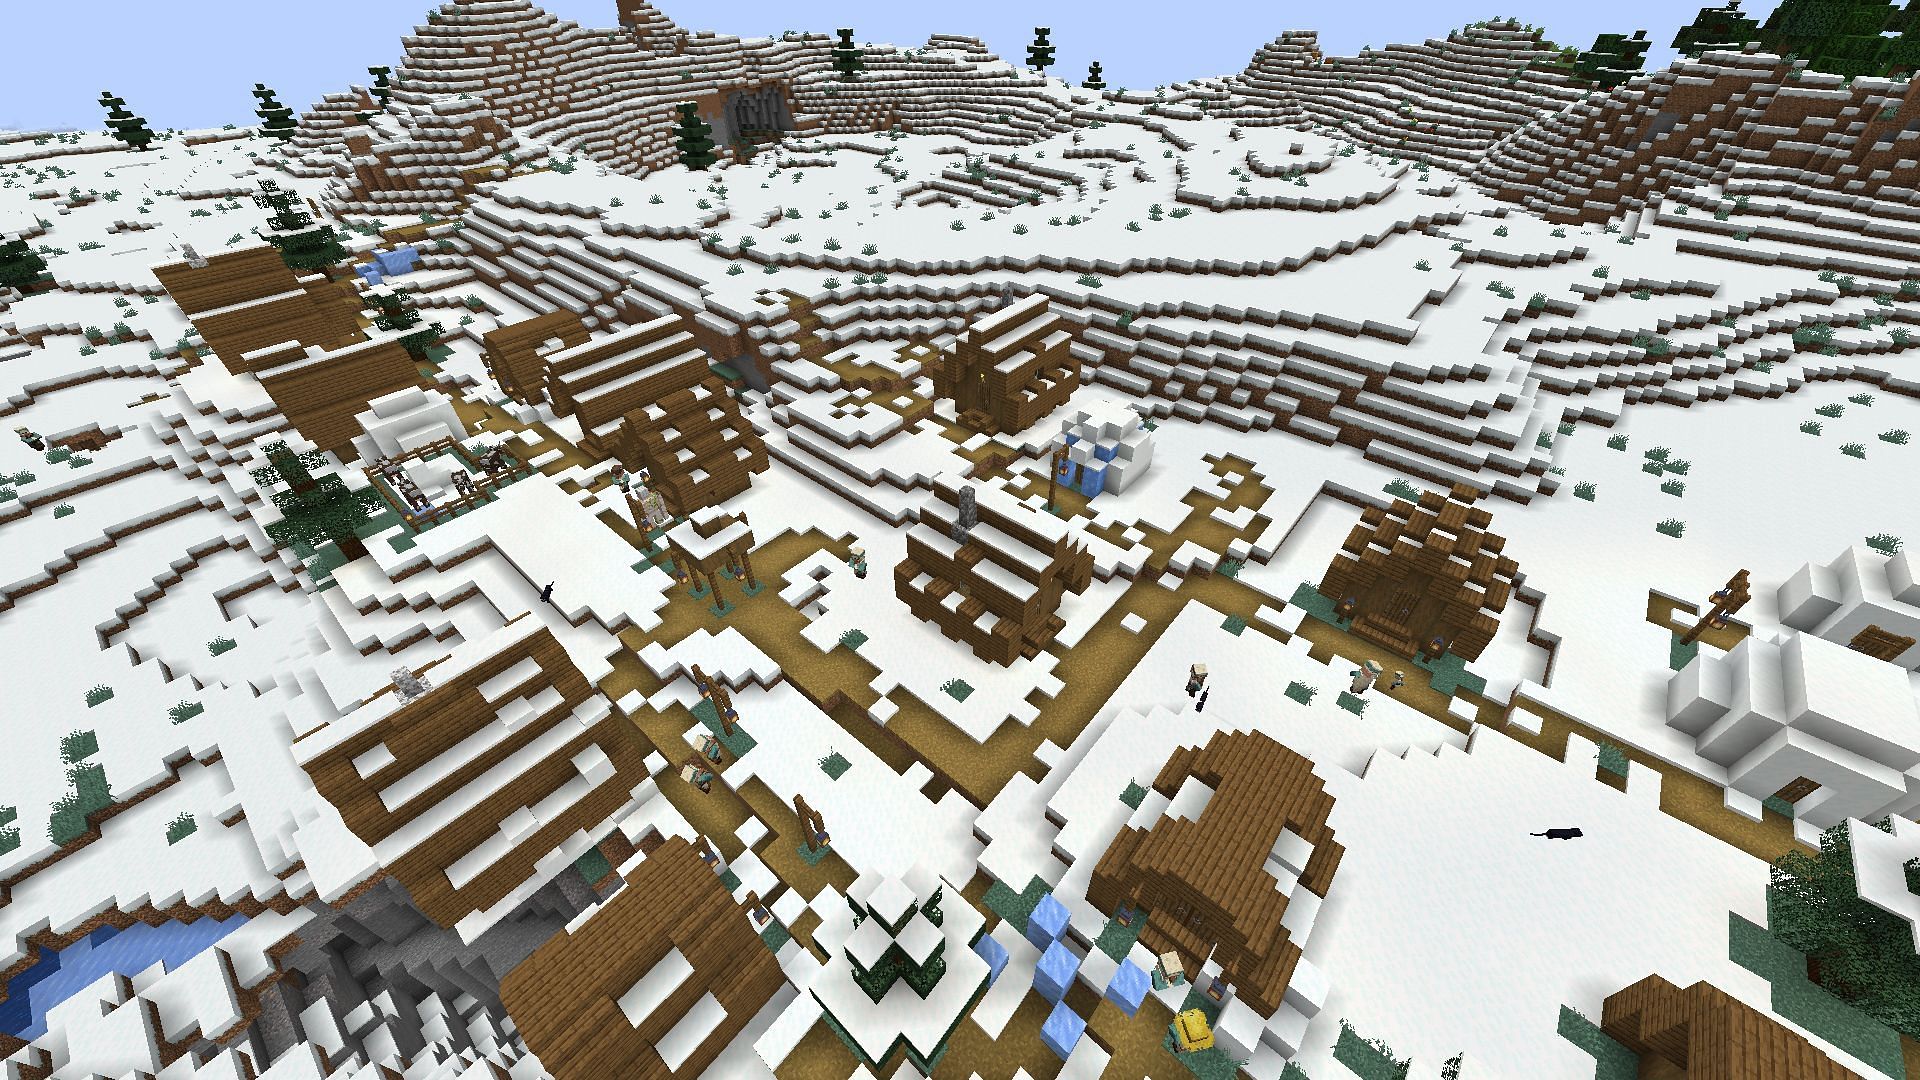 One of the snowy villages found on the -5224658538943565064 seed (Image via Minecraft)